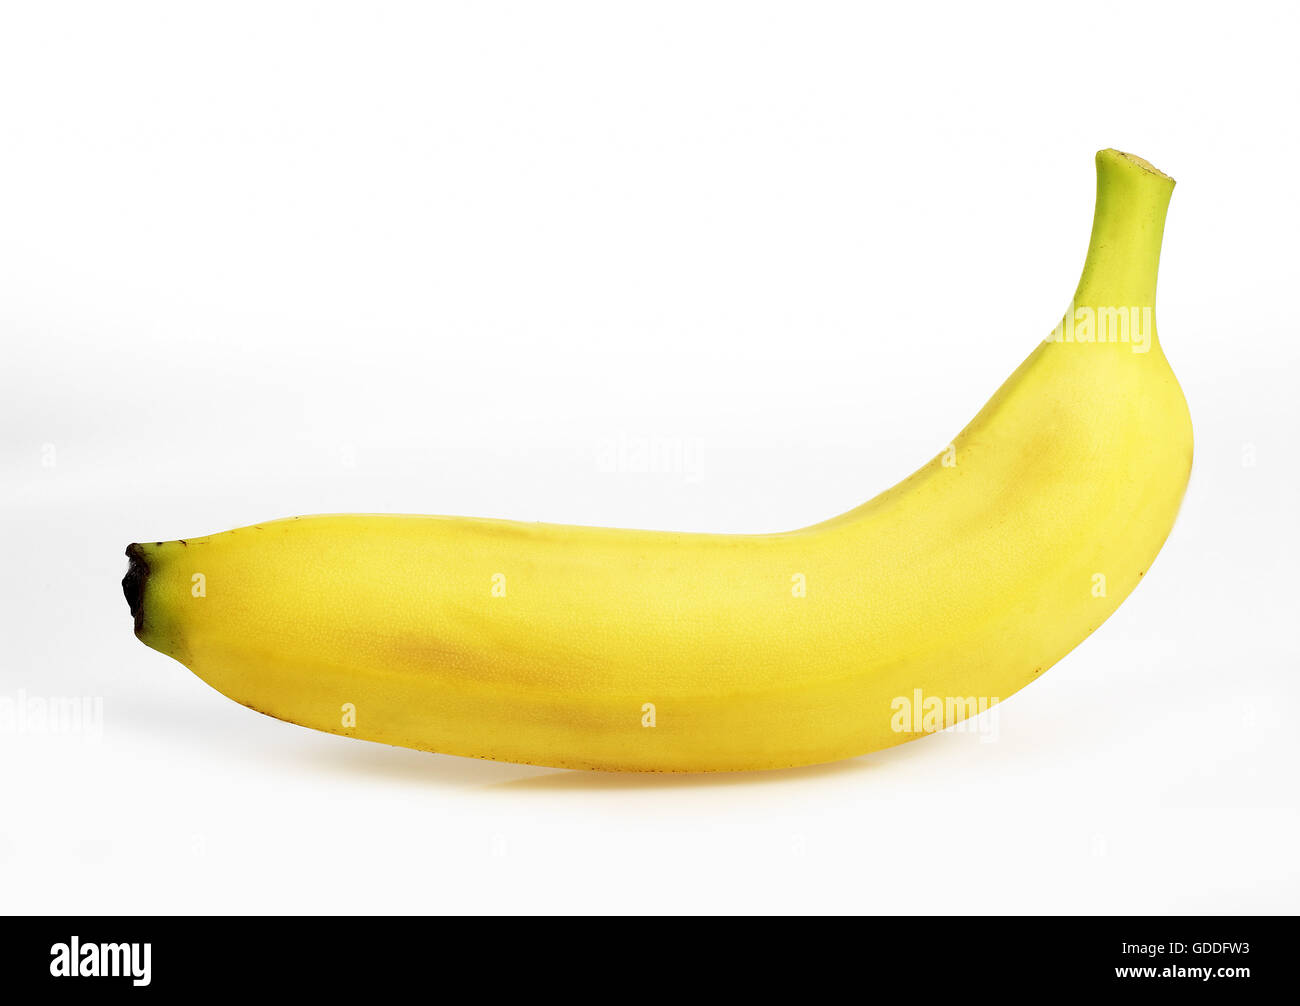 BANANA AGAINST WHITE BACKGROUND Banque D'Images